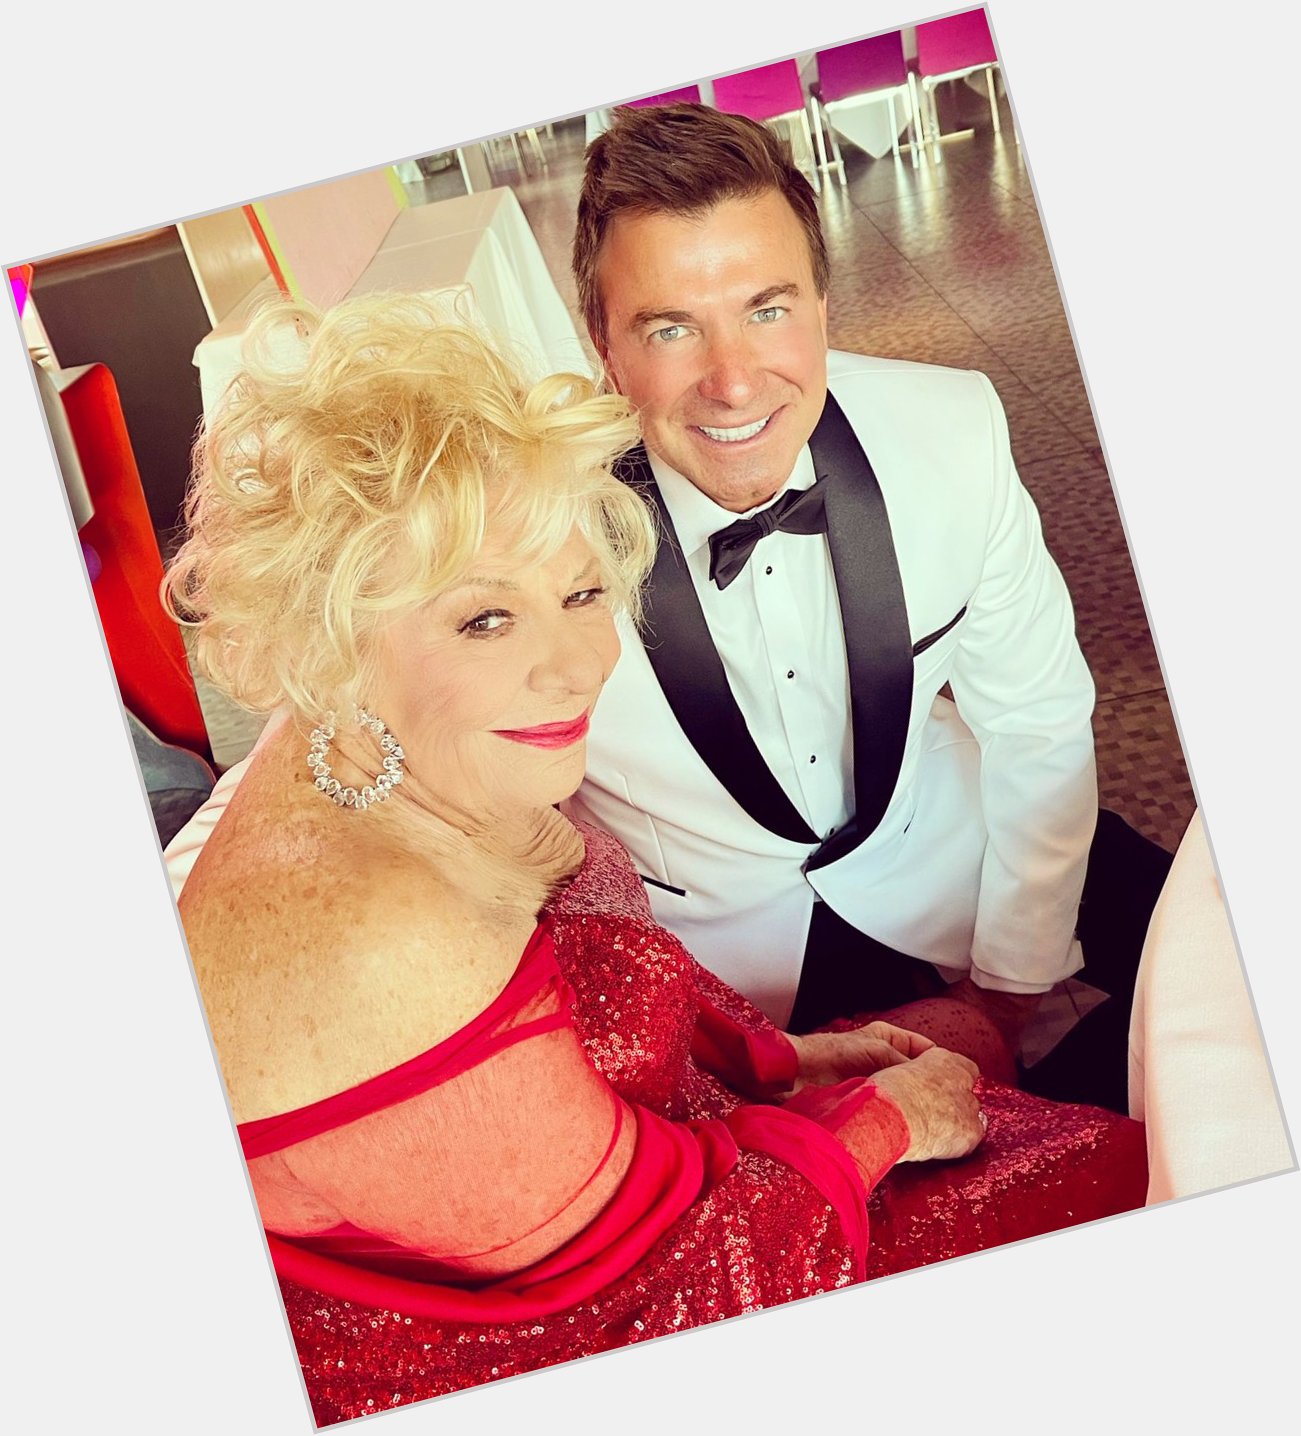 Happy to emcee the 90th birthday party celebration of my incredible friend, Renee Taylor. What a night! 